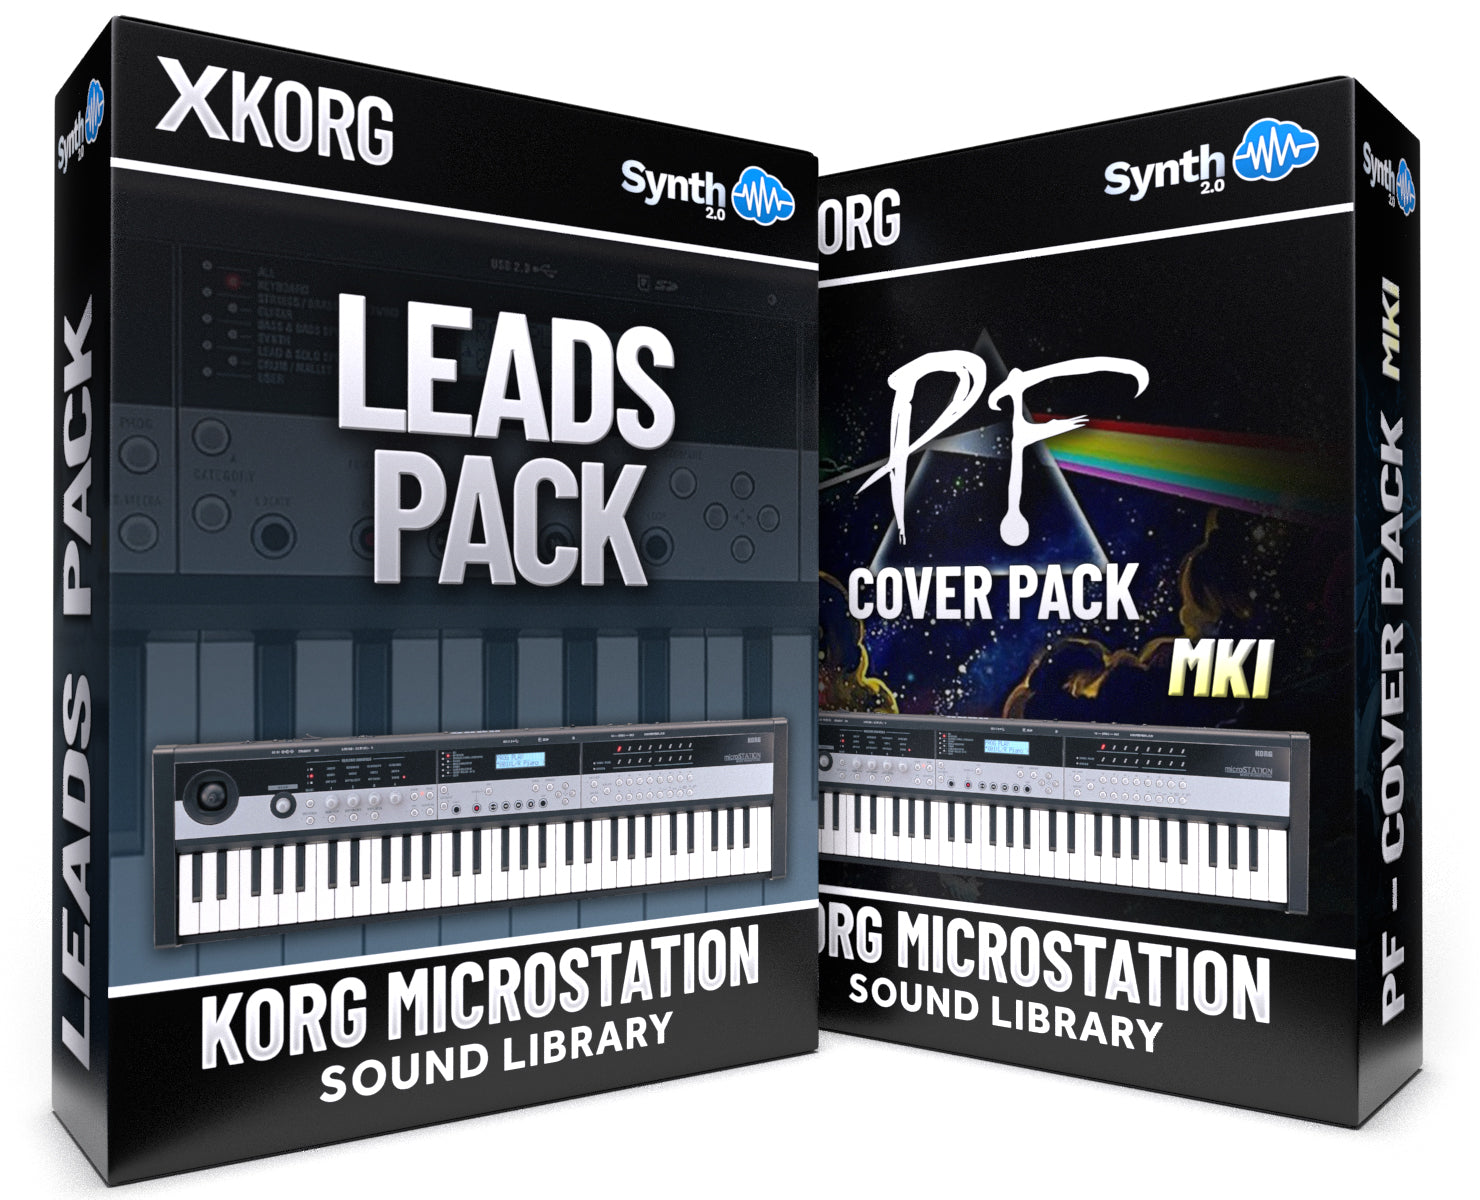 SCL078 - ( Bundle ) - Leads Pack + PF Cover Pack MKI - Korg Microstation ( 21 presets )